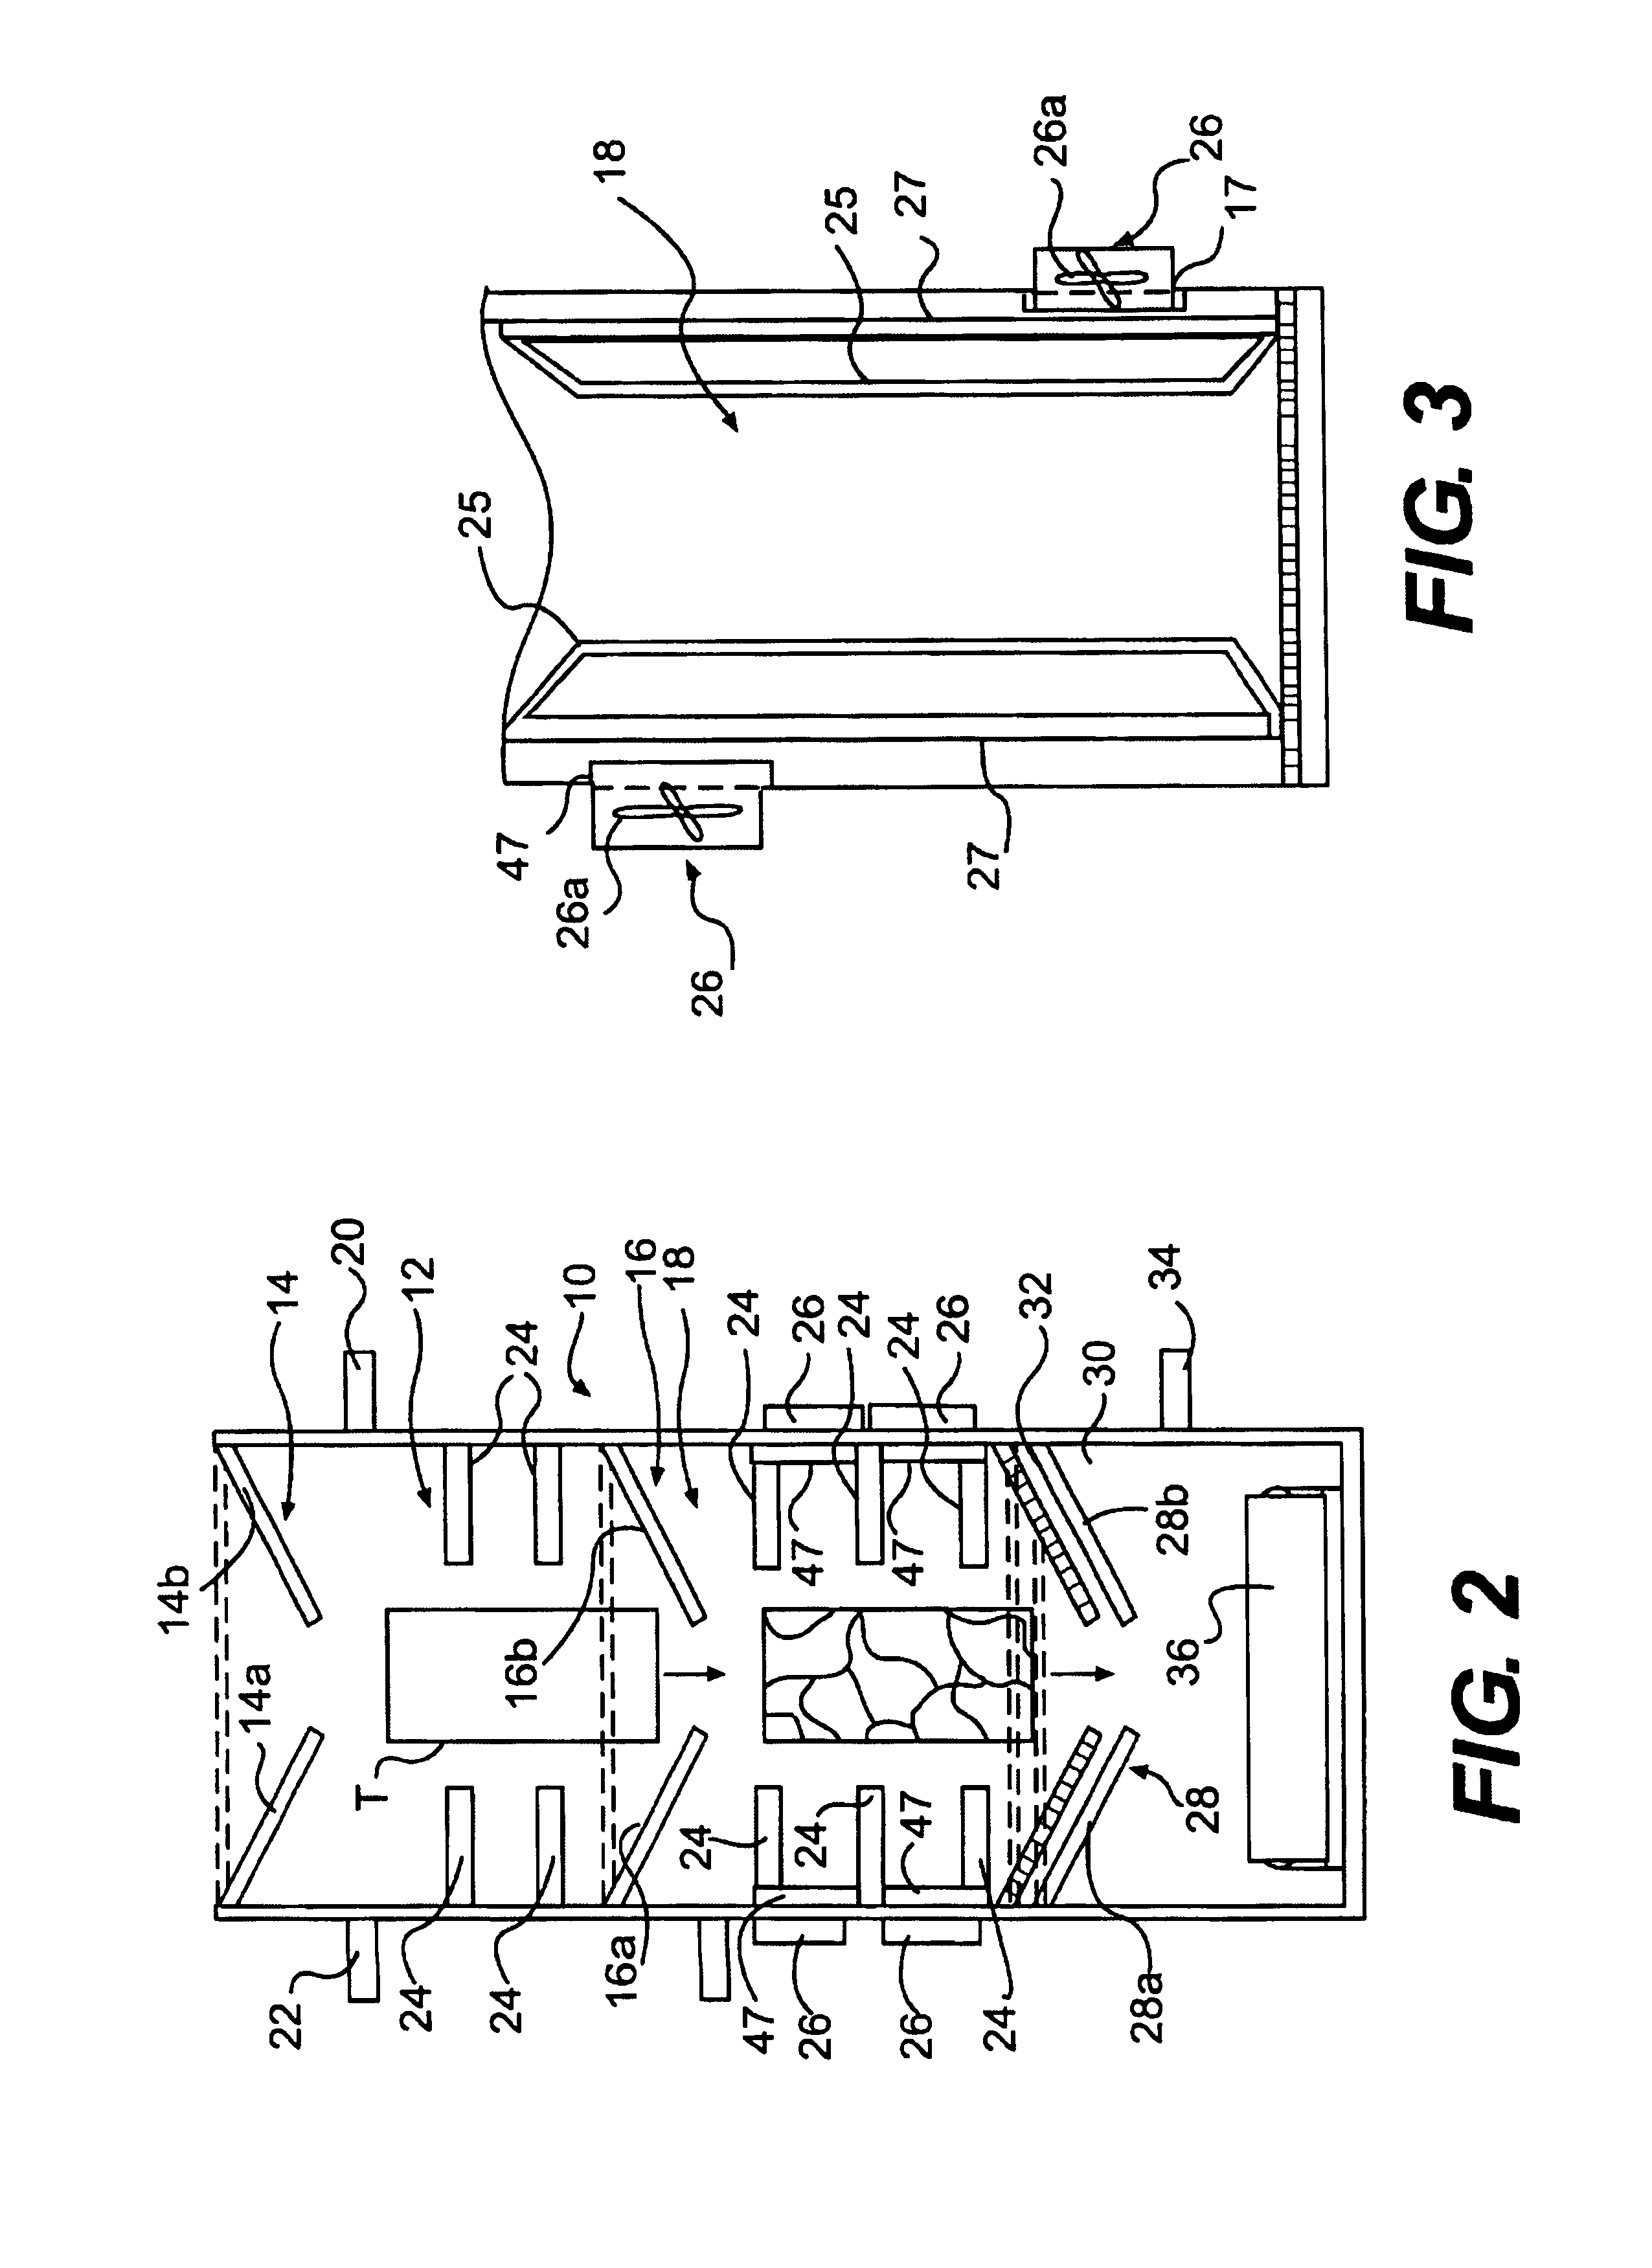 Microwave pyrolysis apparatus for waste tires